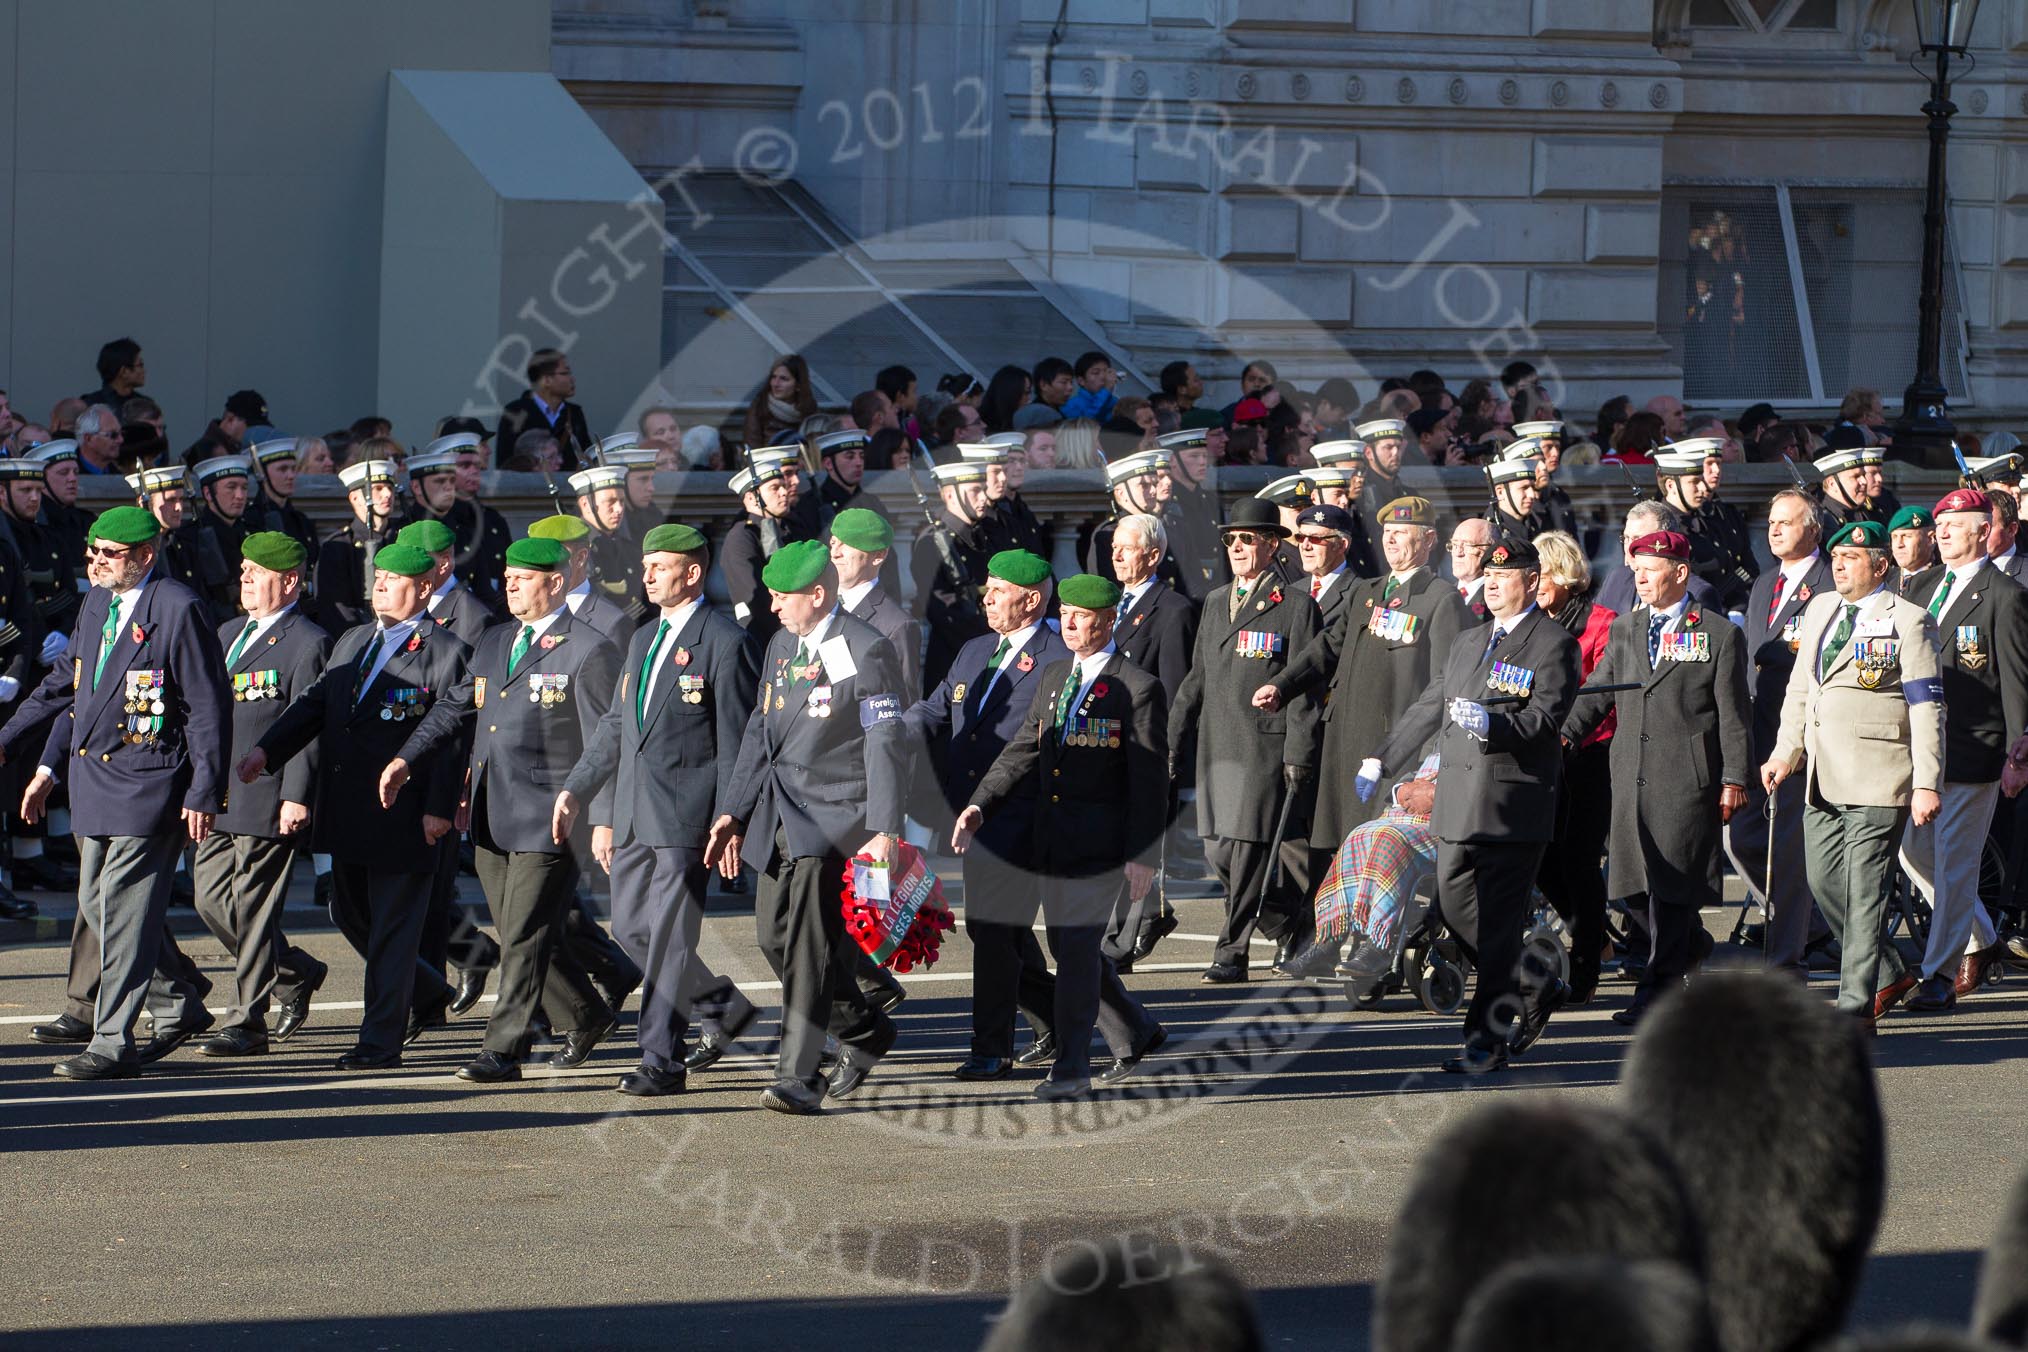 Remembrance Sunday 2012 Cenotaph March Past: Group D15 - Foreign Legion Association and D16 - Not Forgotten Association..
Whitehall, Cenotaph,
London SW1,

United Kingdom,
on 11 November 2012 at 12:07, image #1335